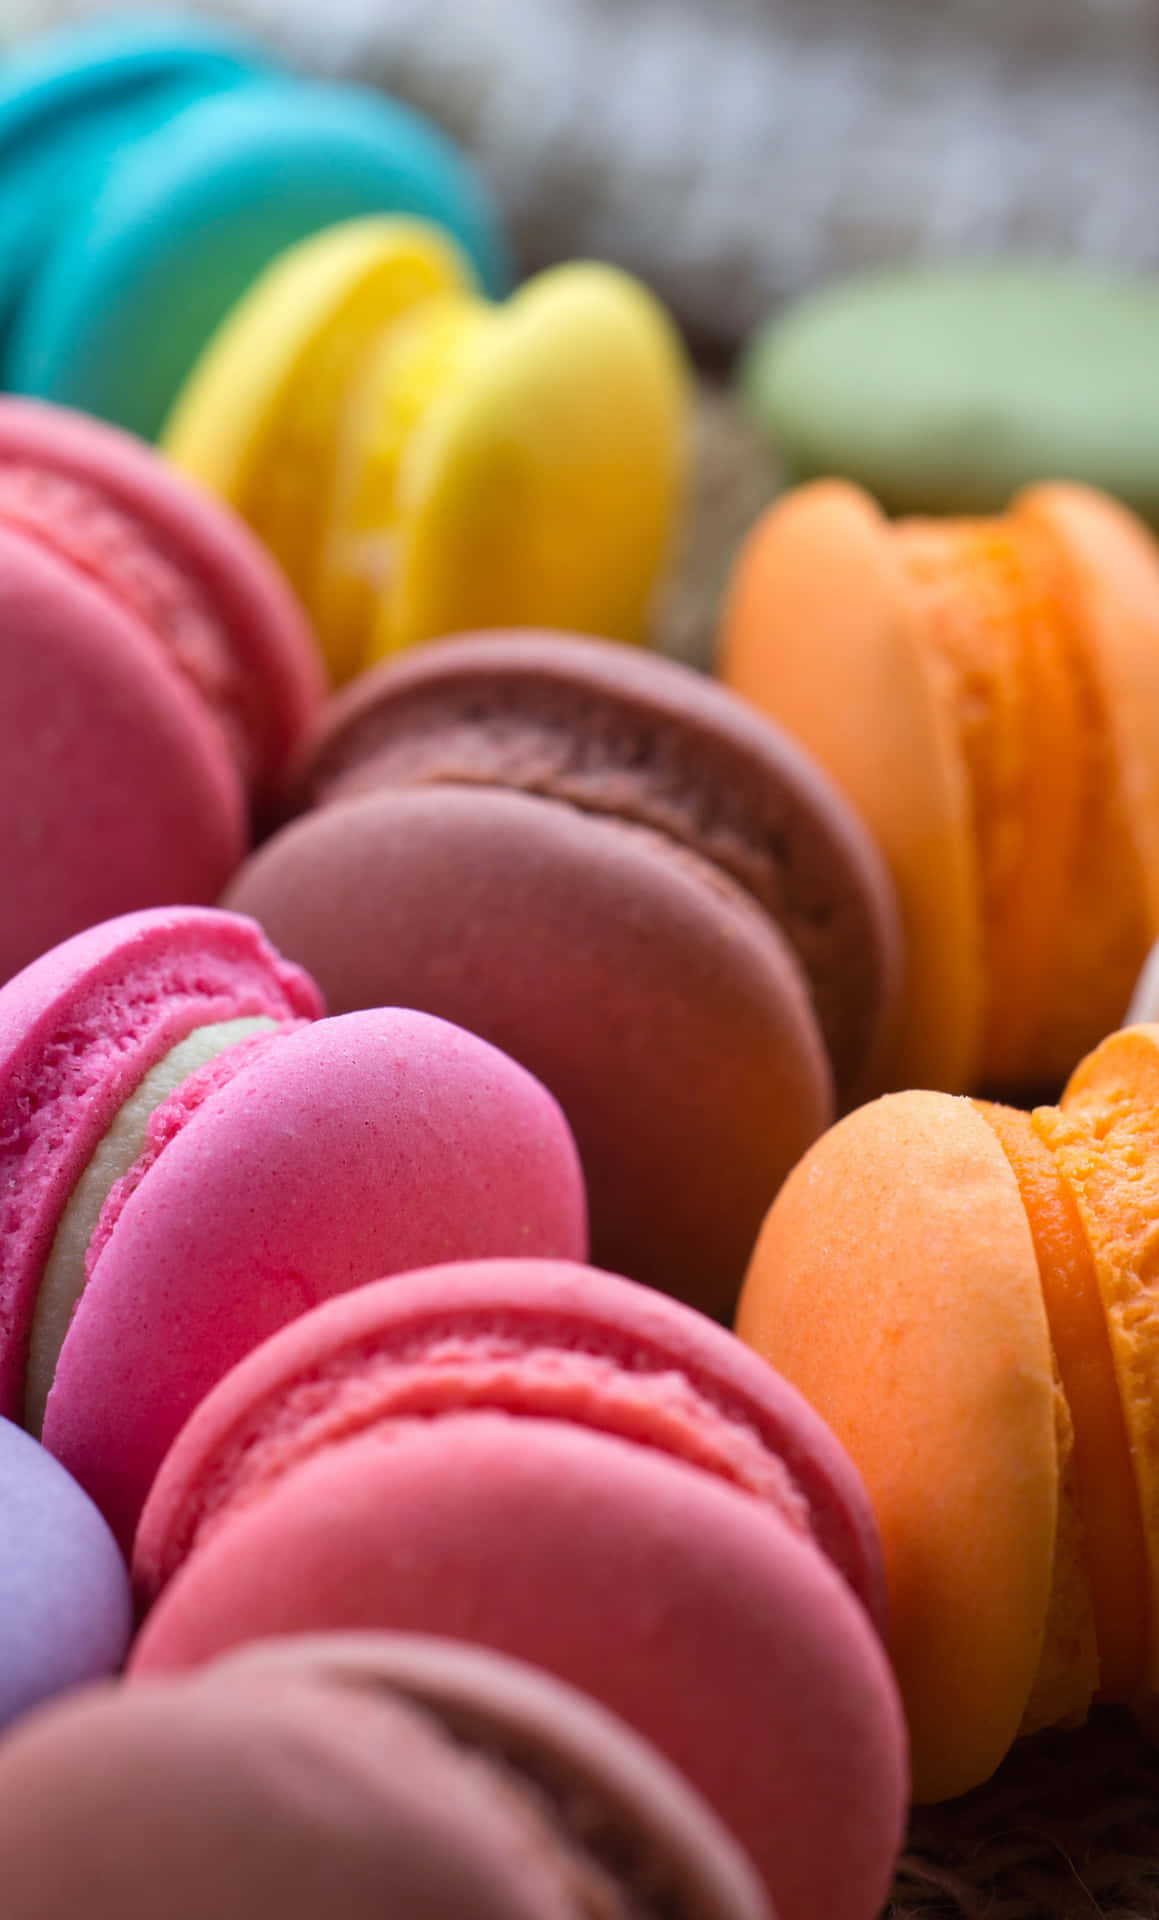 Dazzling And Vibrant Sweet Macaron Wallpaper